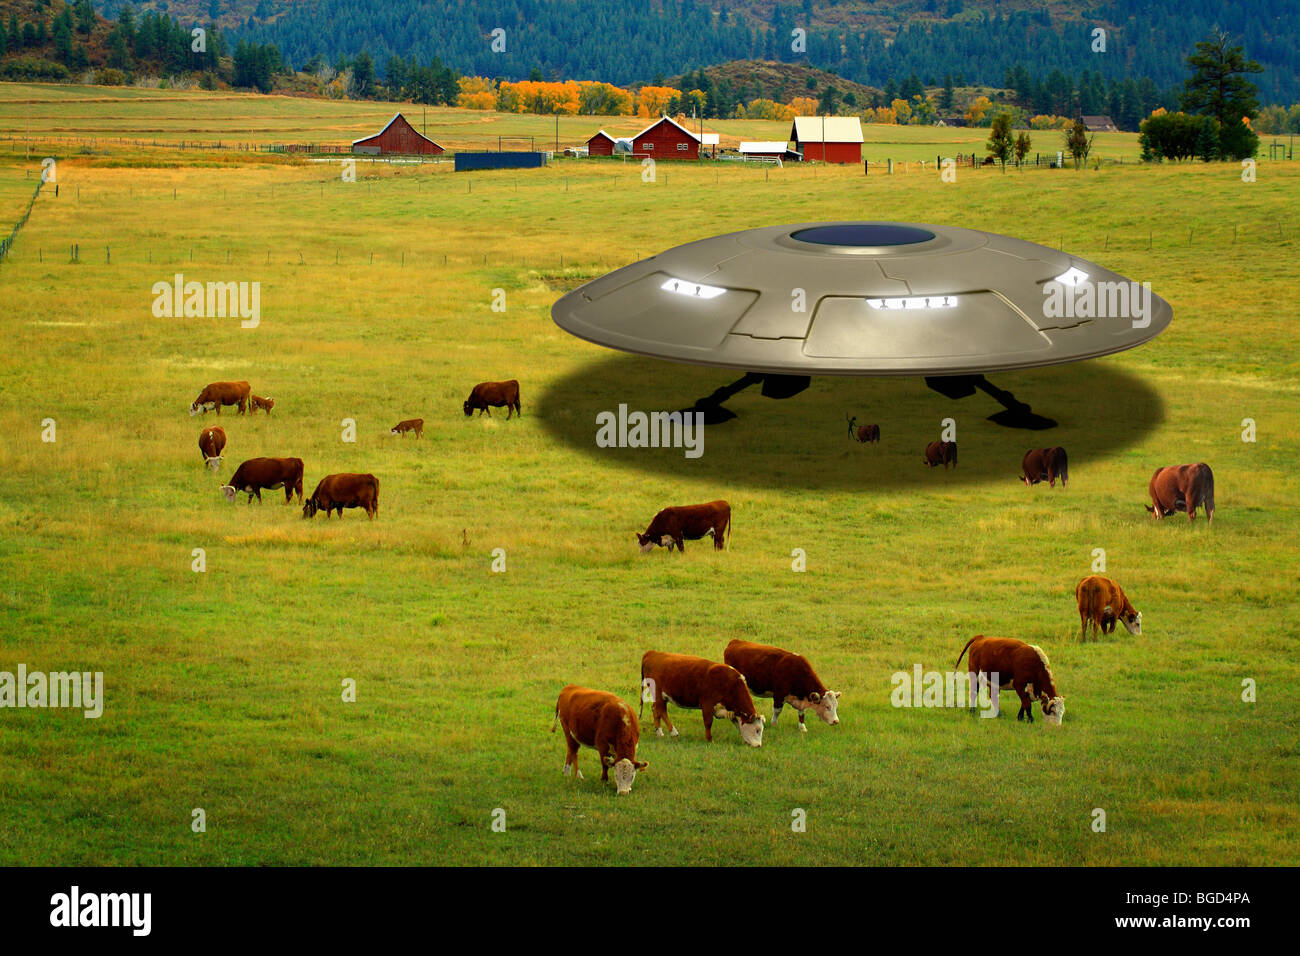 Landed UFO flying saucer with alien abducting cattle Stock Photo